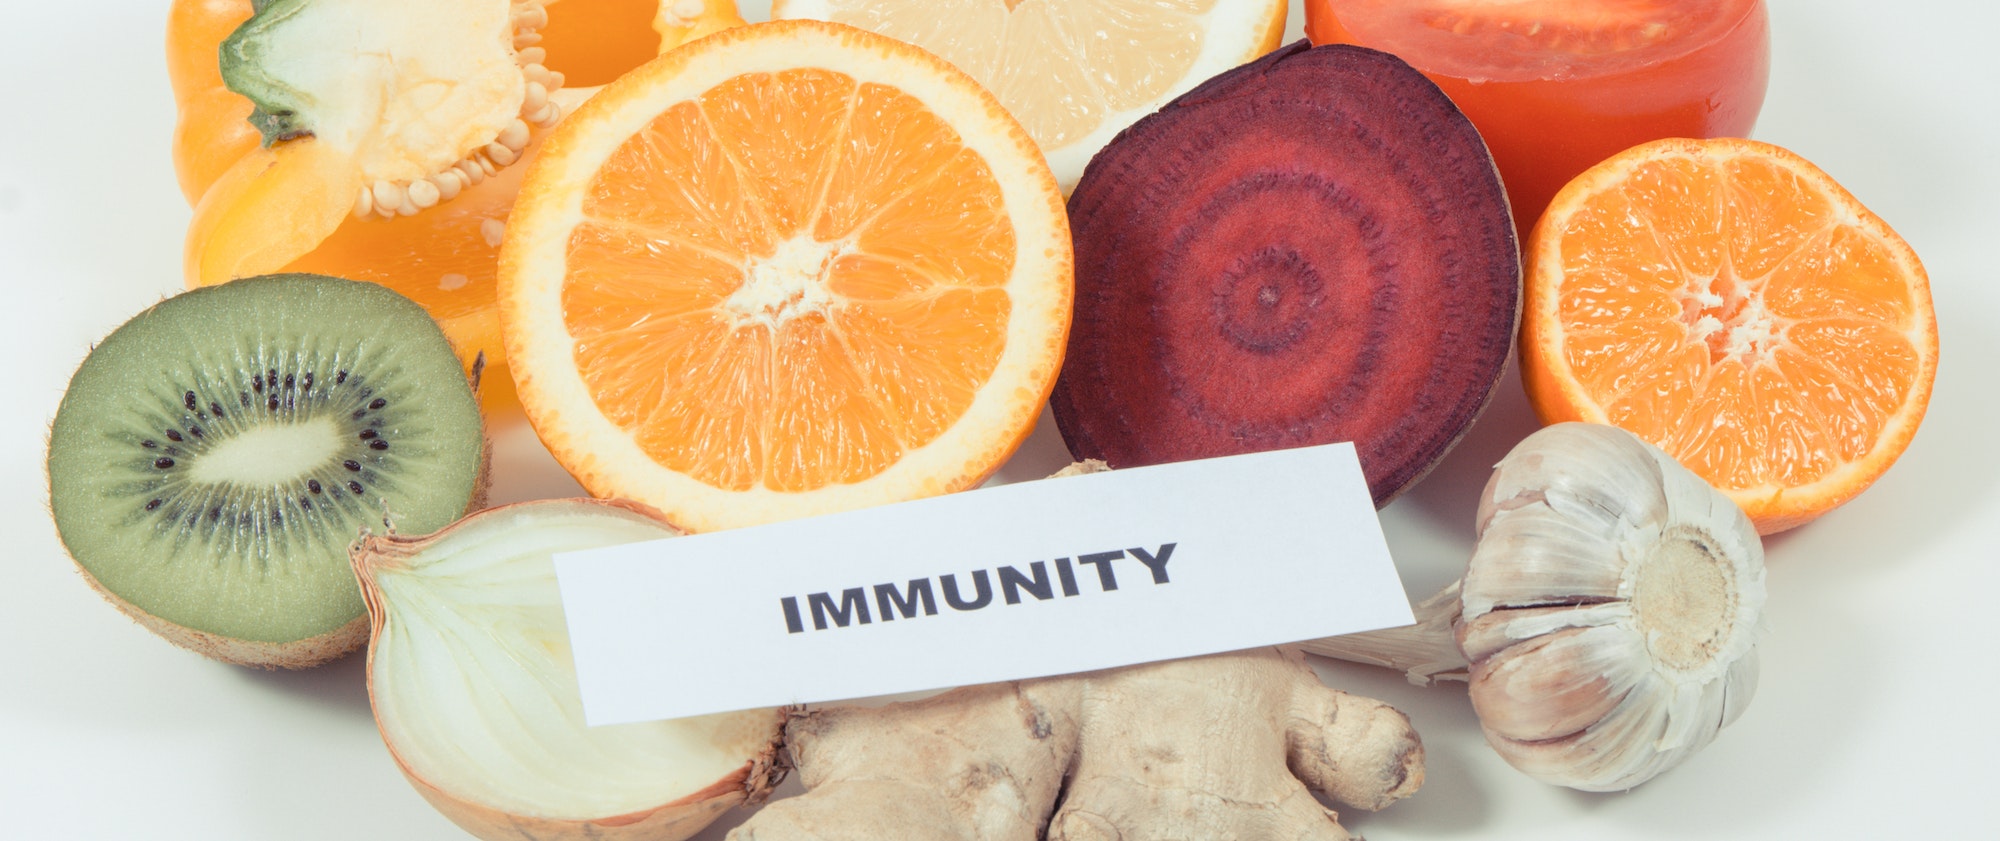 nutrition and immunity